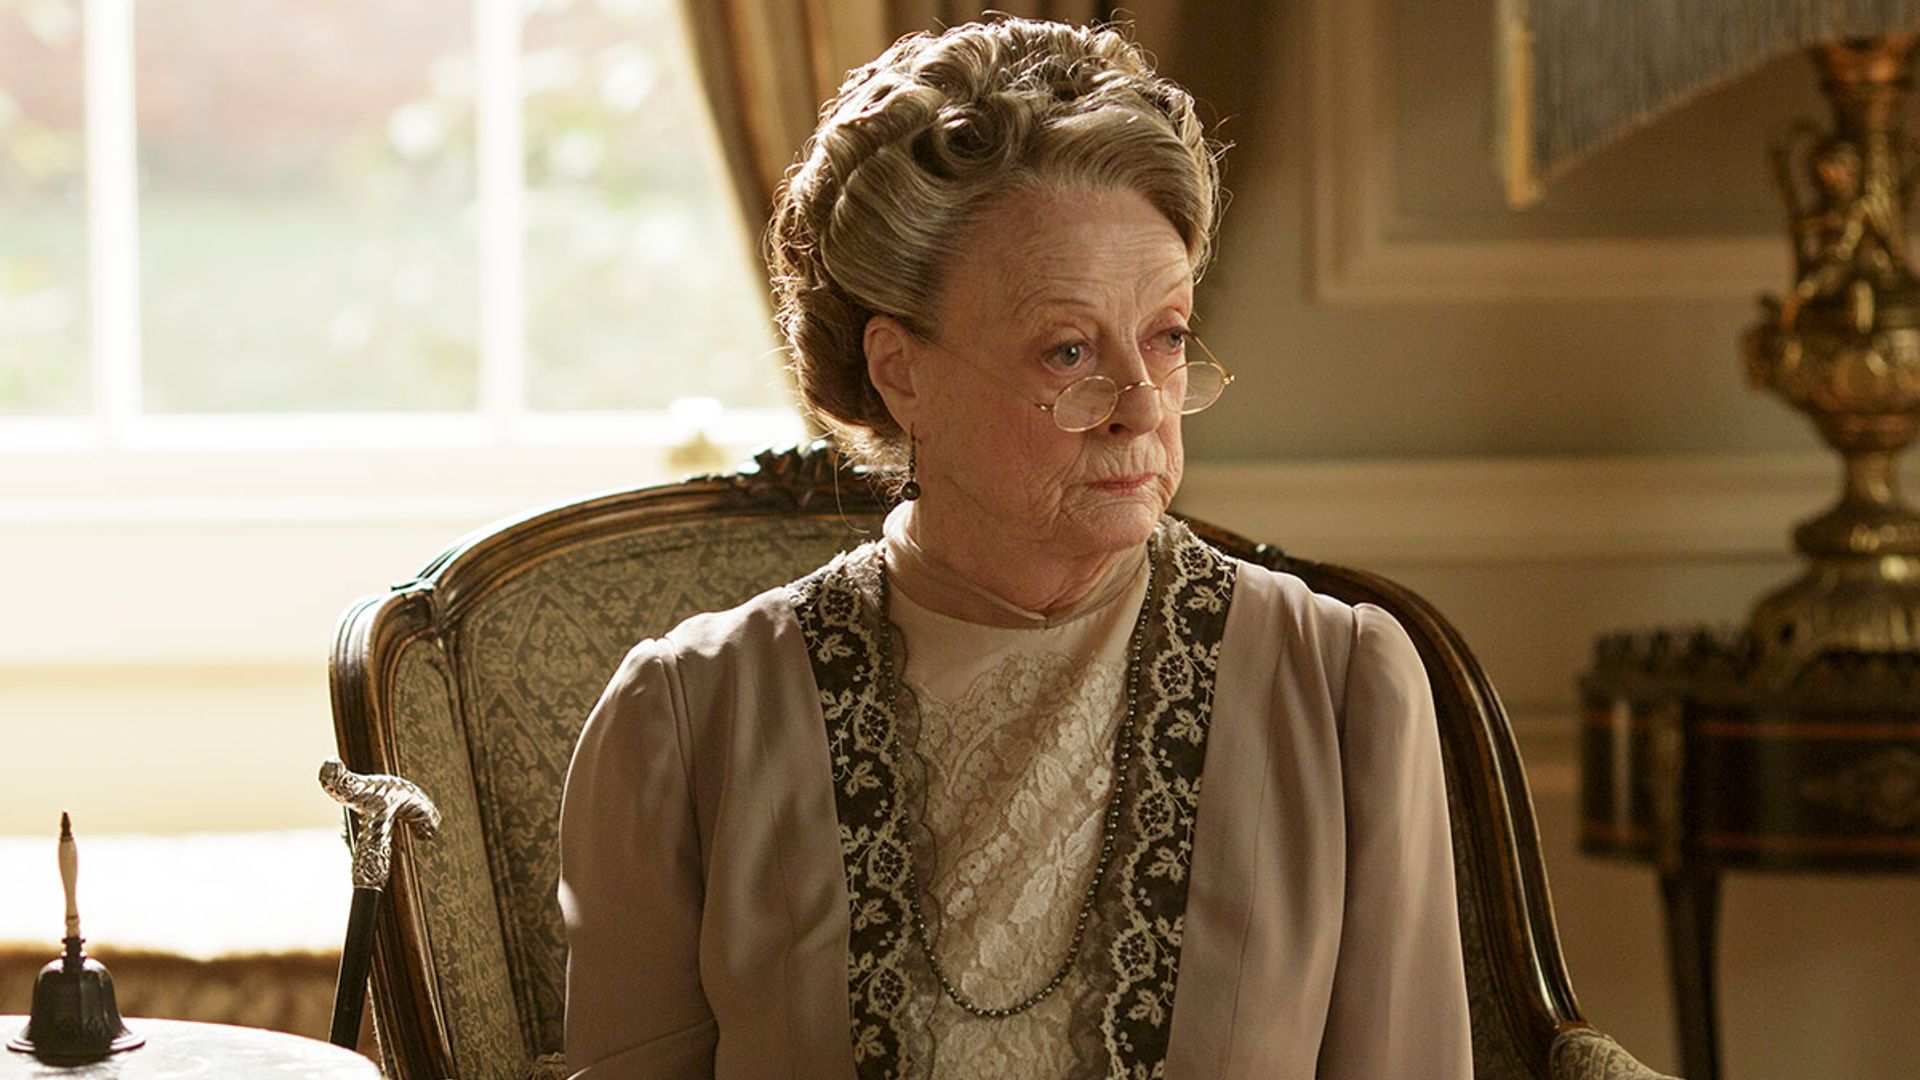 Downton Abbey star Maggie Smith looks incredible at start of career - see the gorgeous snaps